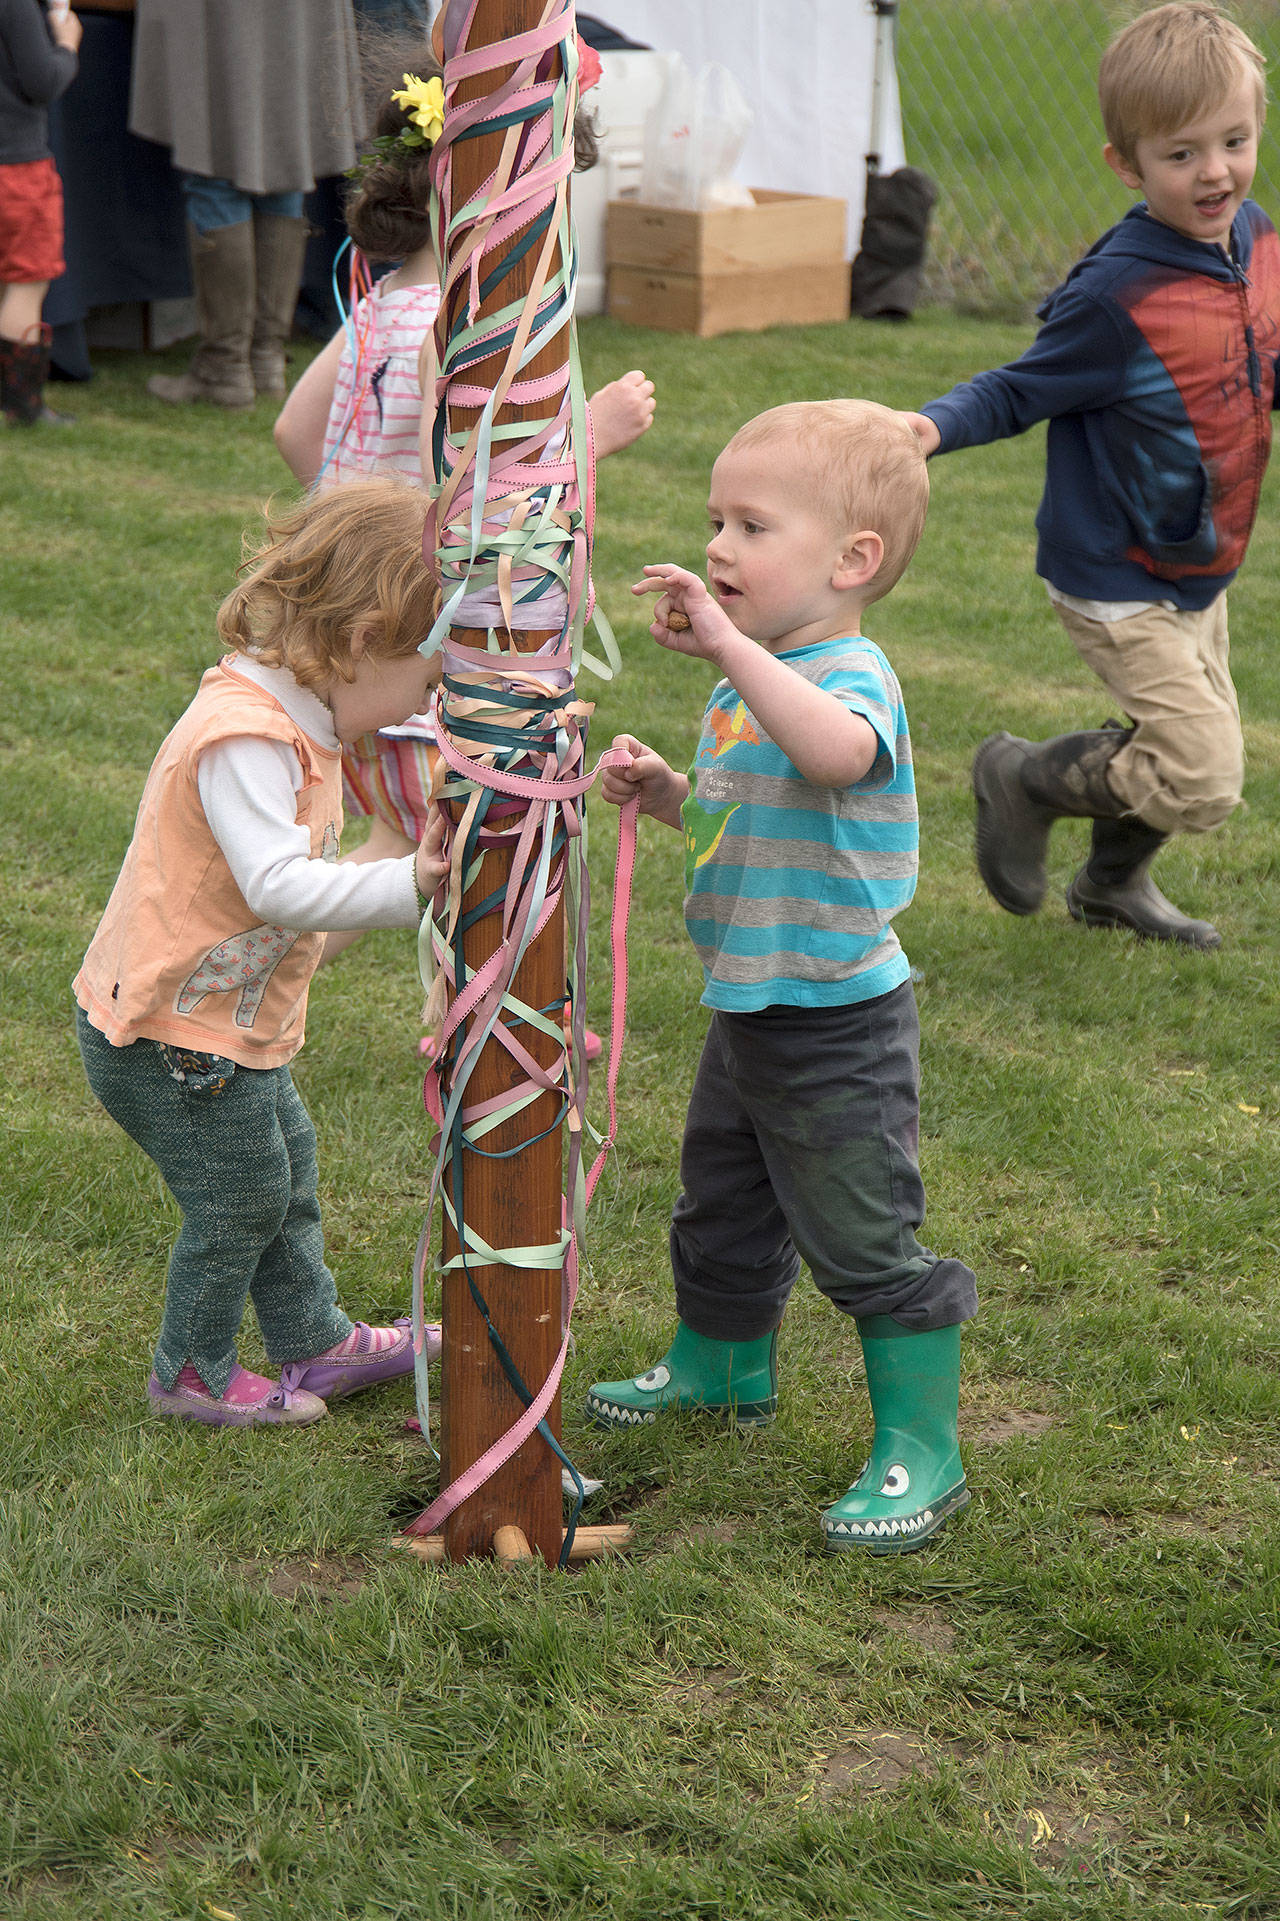 Toddlers Grace Haakenson and Wulfric White, both age 2, examine the Carnation Farmers Market Maypole as their older siblings chase each other around it during opening day festivities, Tuesday, May 2.                                Carol Ladwig/Staff Photo